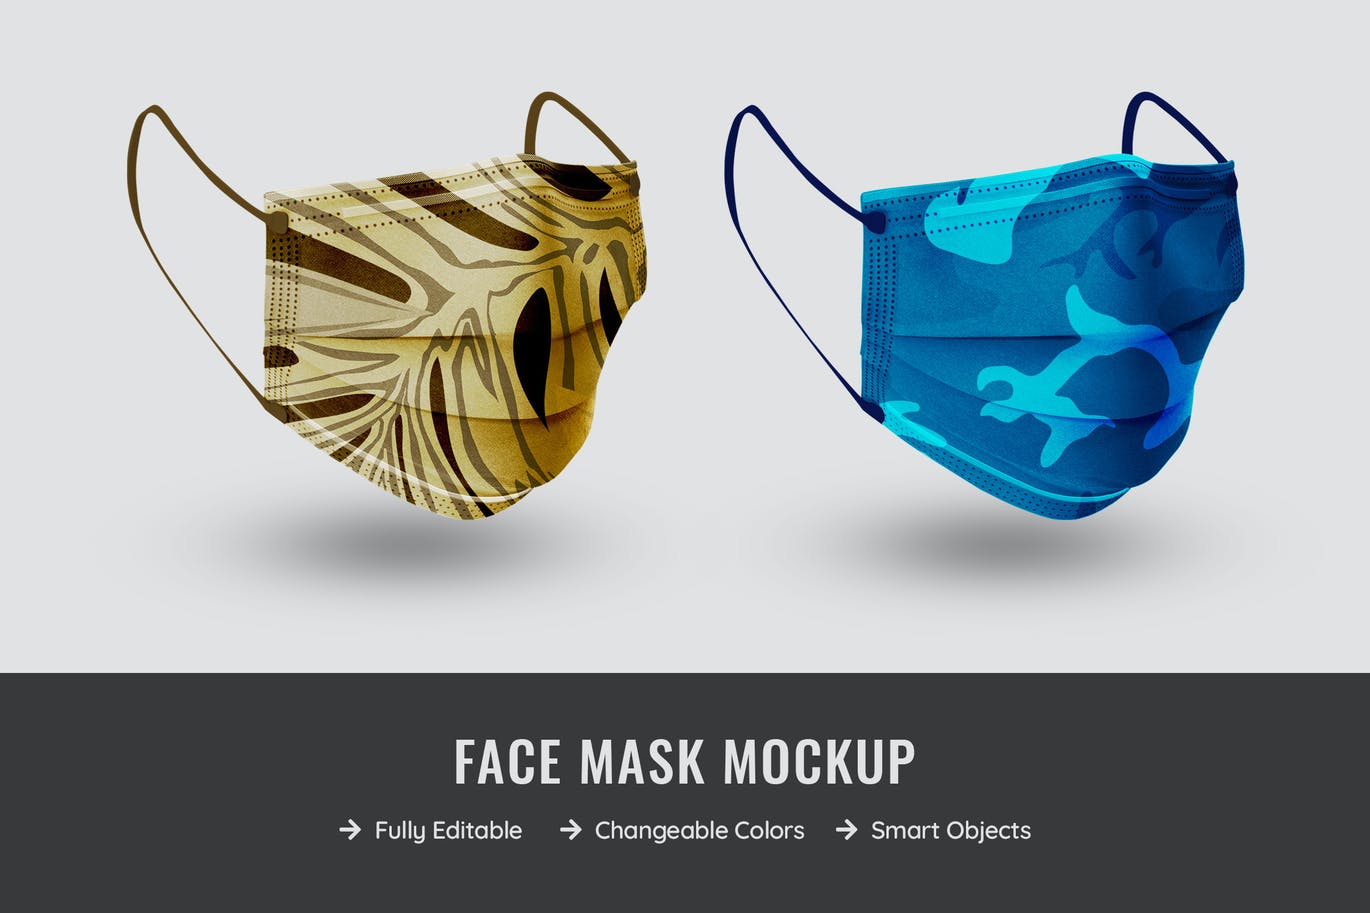 Two face mask mockup collection